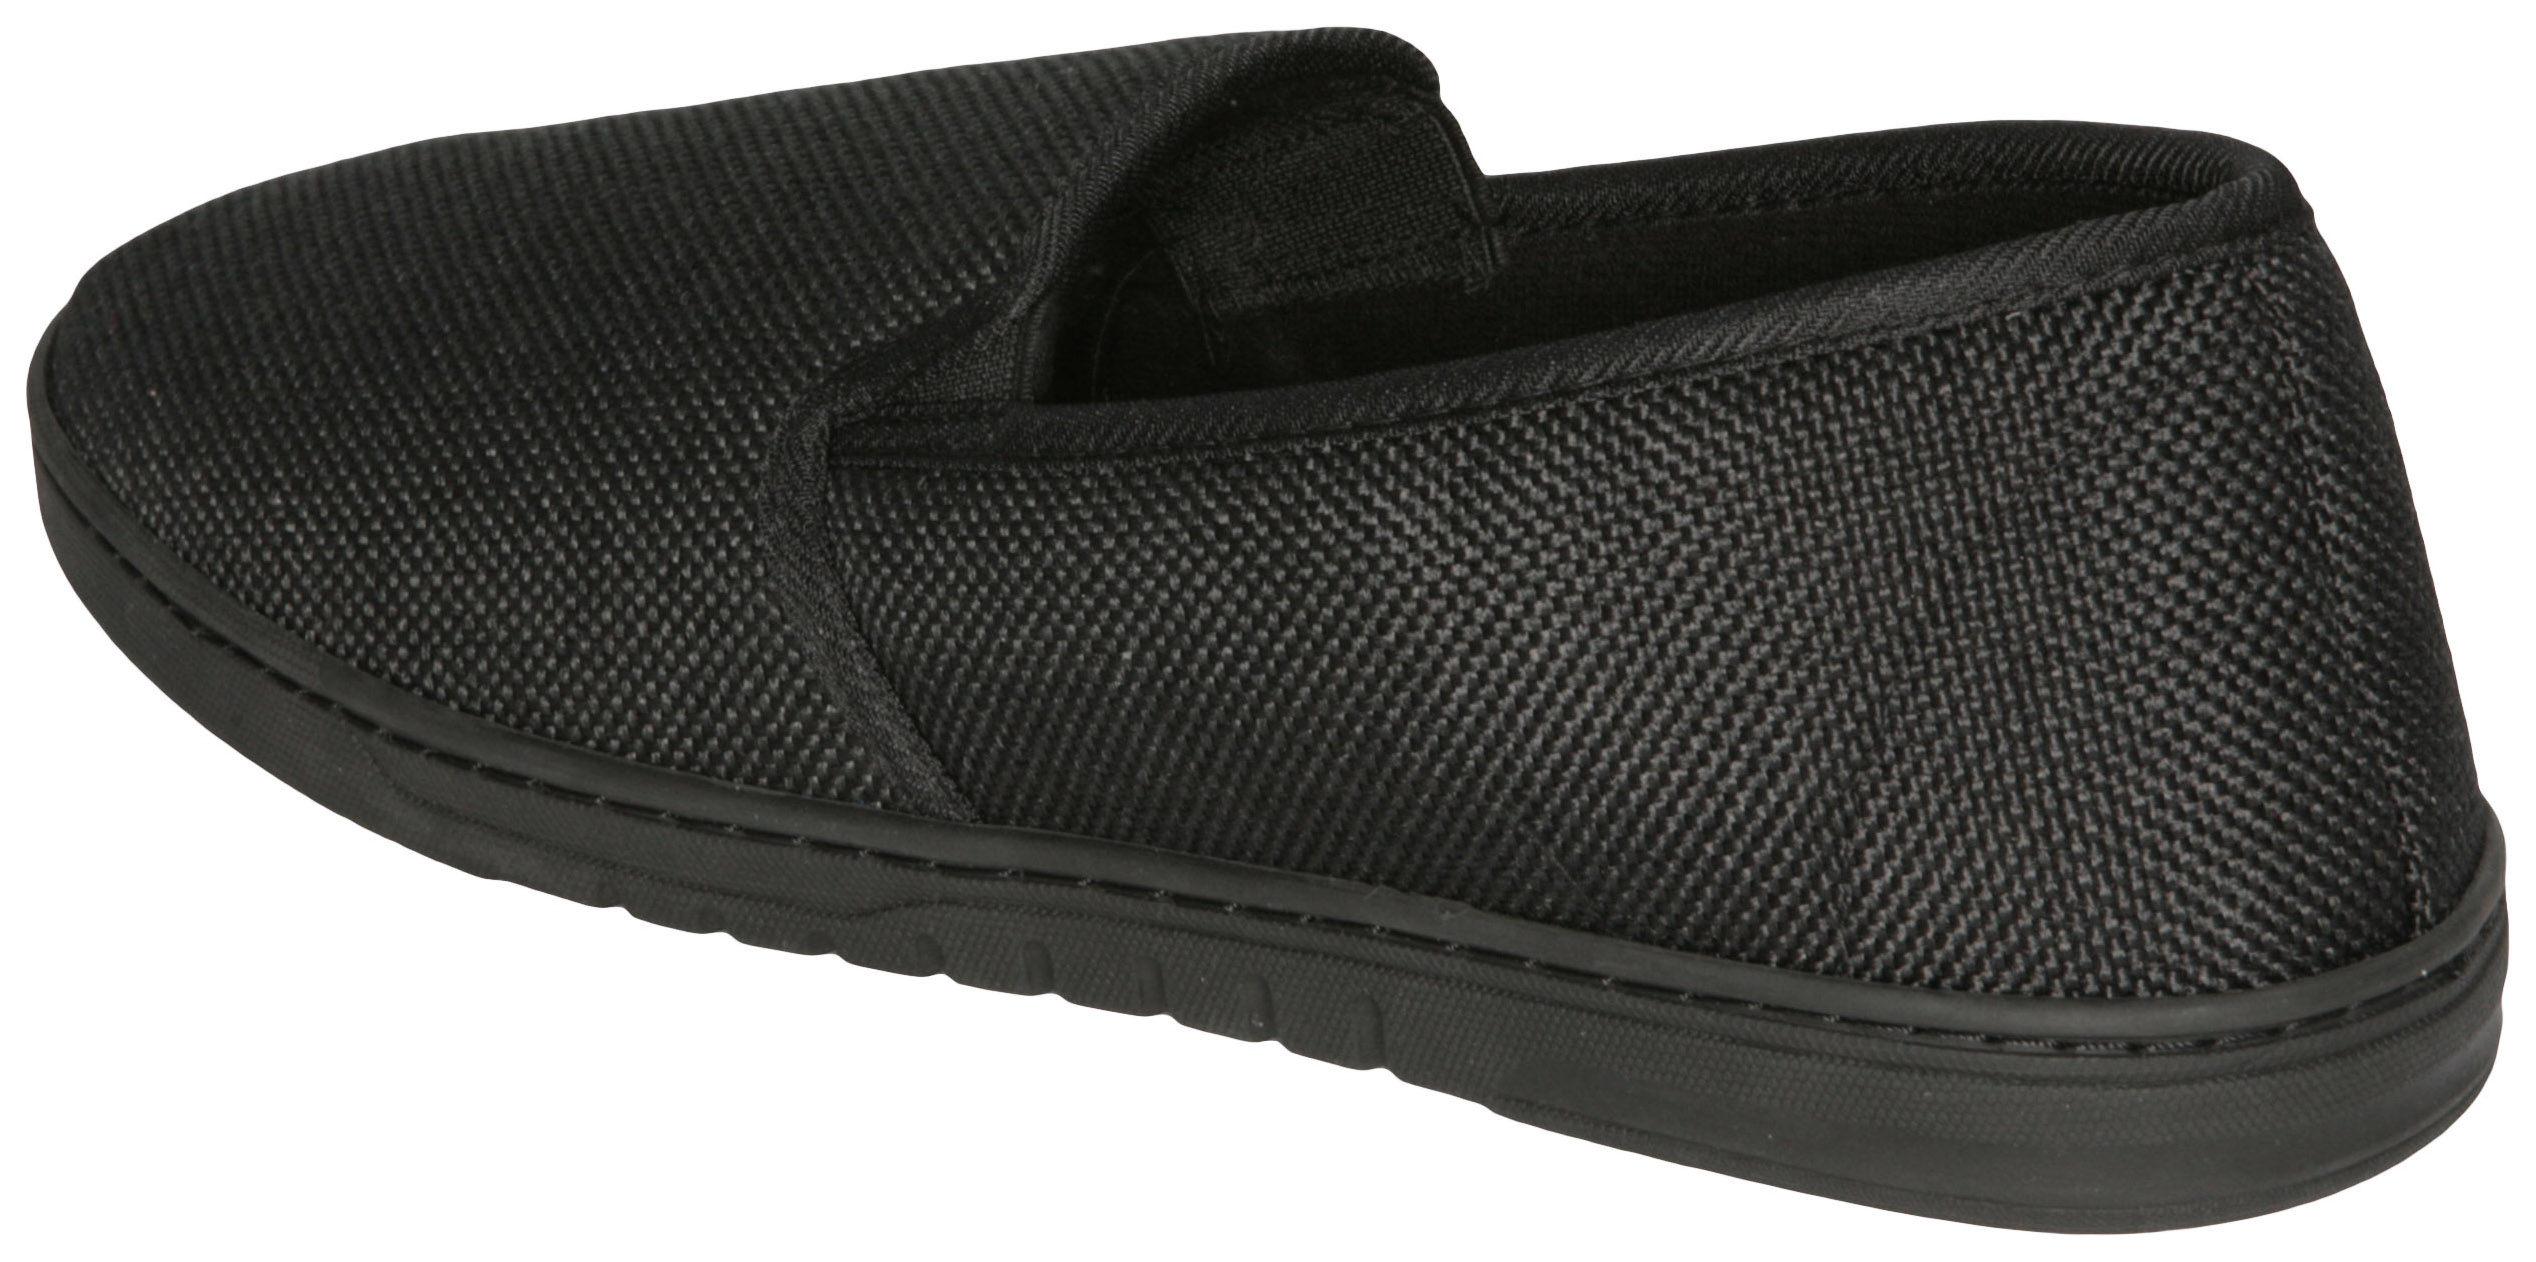 Deluxe Comfort Men's Memory Foam Slipper, Size 11-12 - Suede Vamp Checkered Lining - Memory Foam Insole - Strong TPR Outsole - Mens Slippers, Black - image 5 of 5